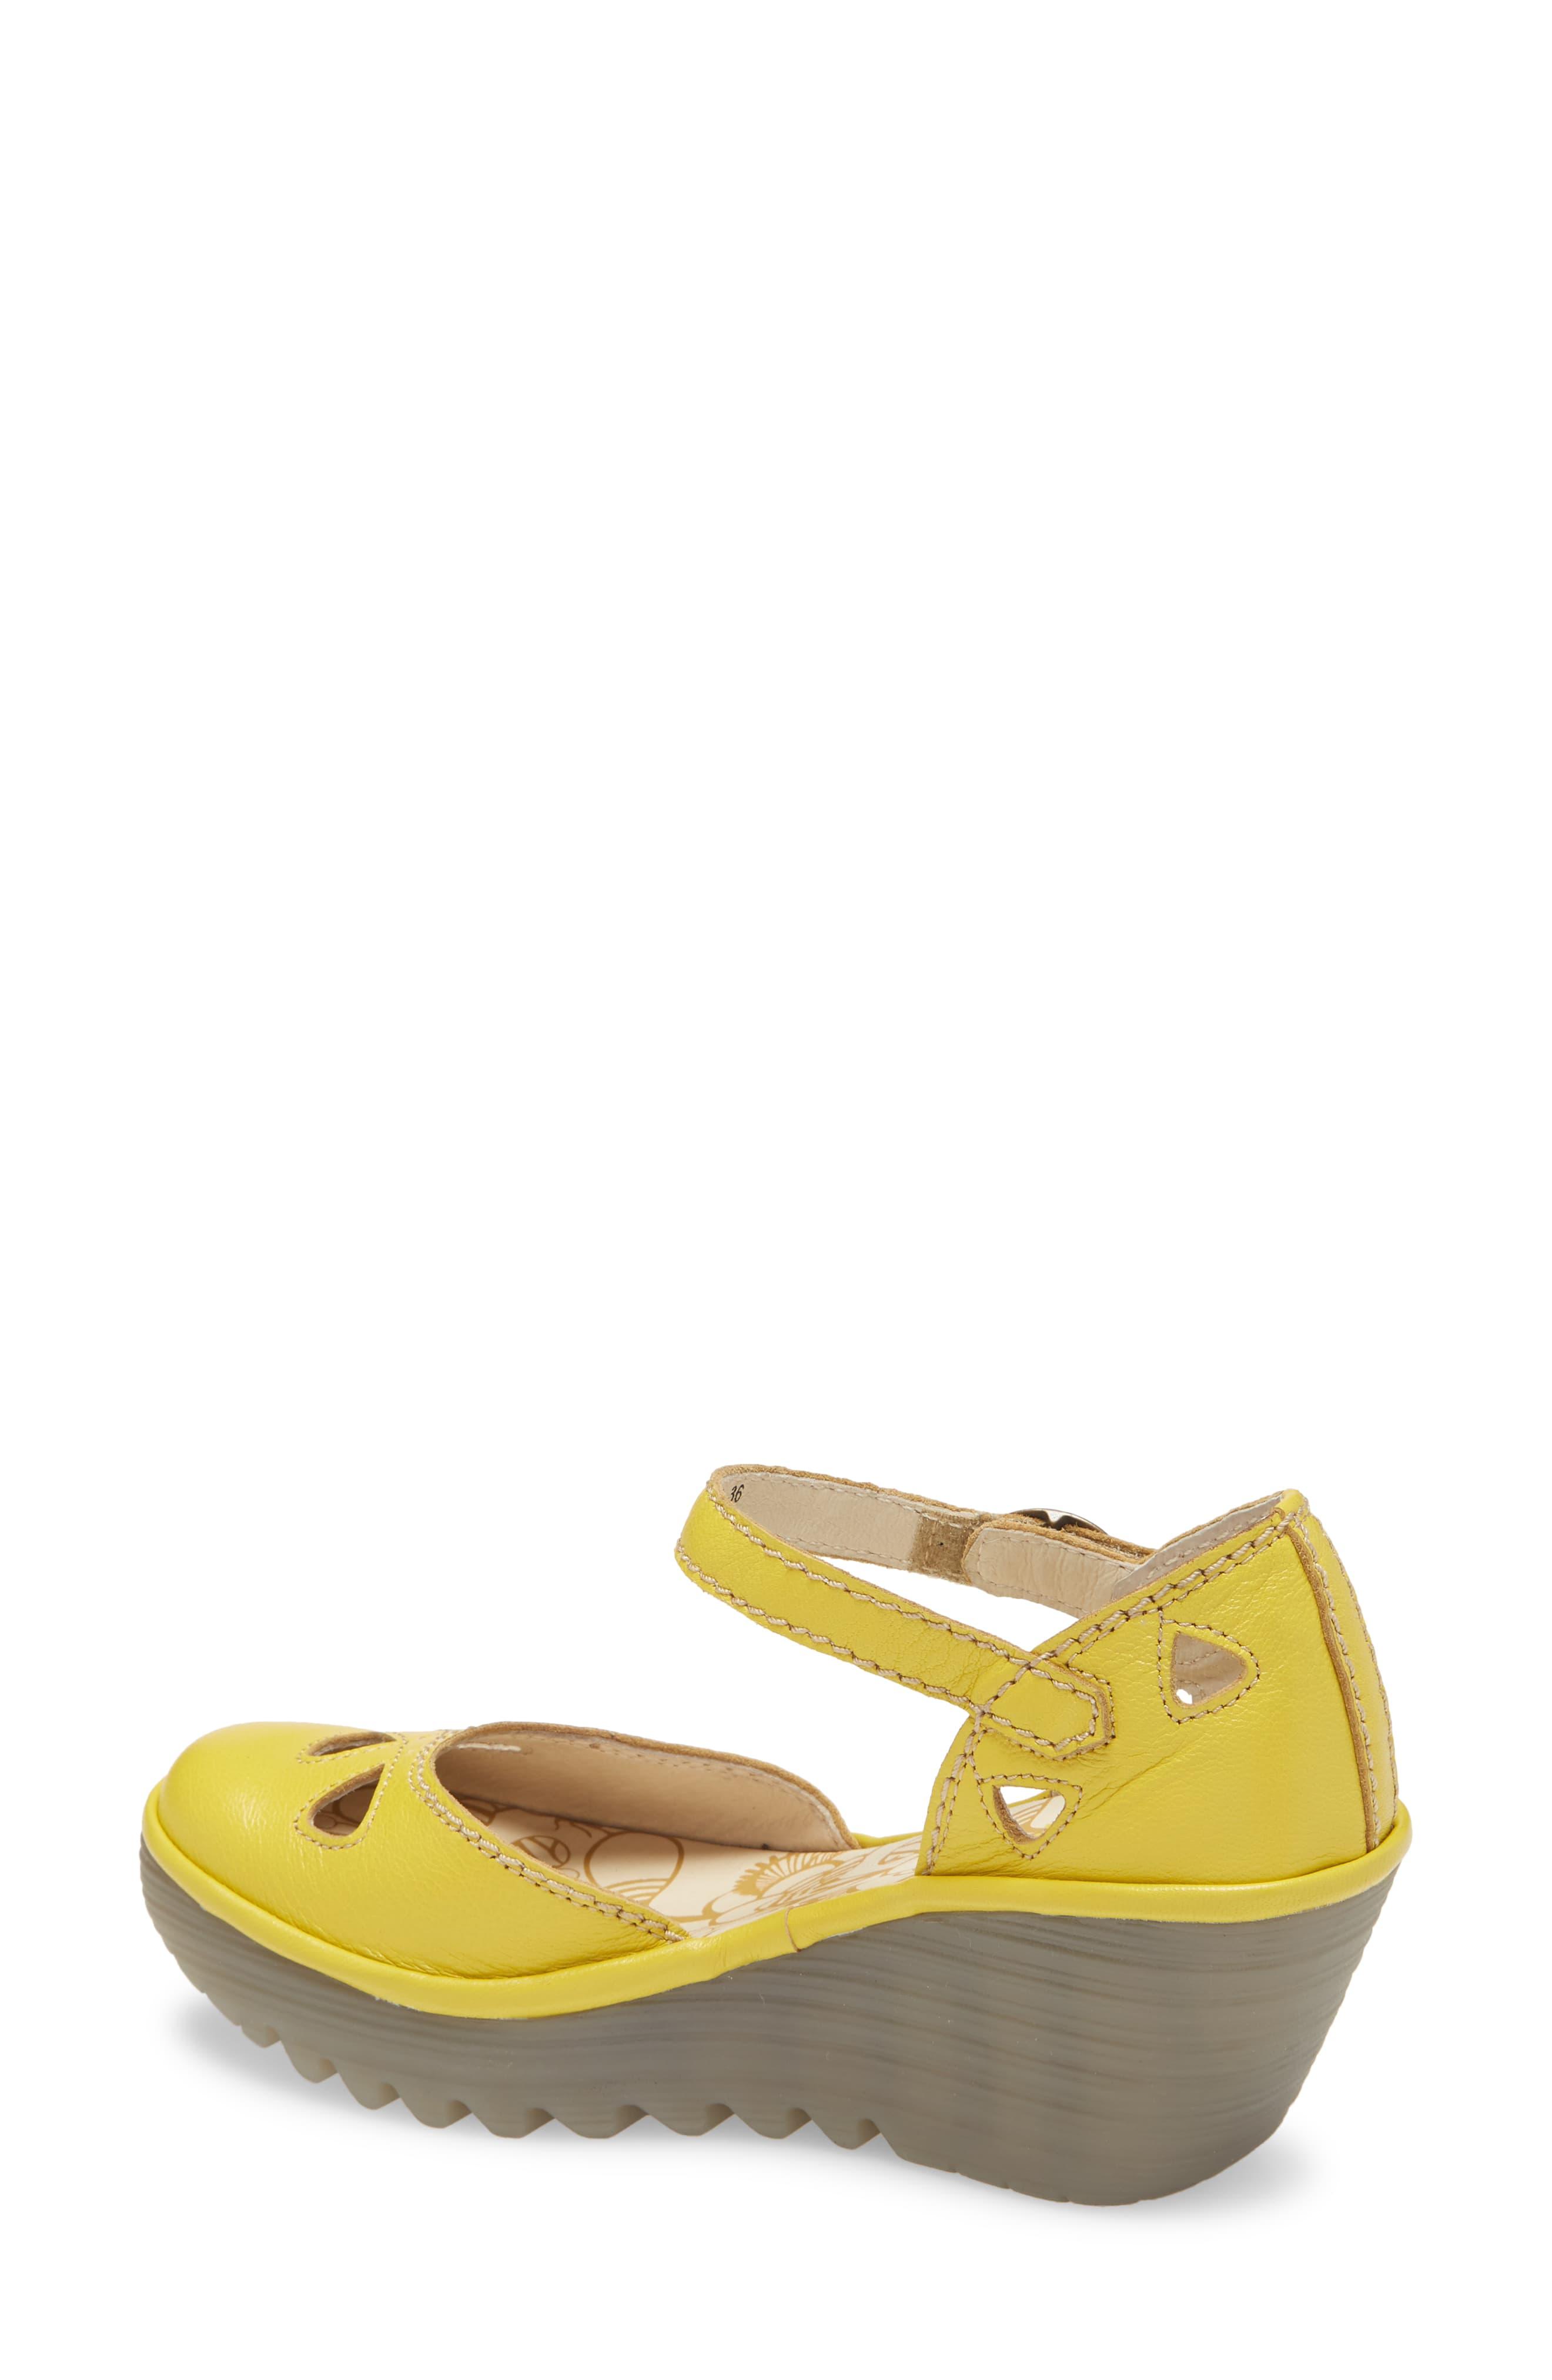 Fly London Yuna Womens Bumblebee Yellow Leather Wedge Sandals - Save 53% -  Lyst